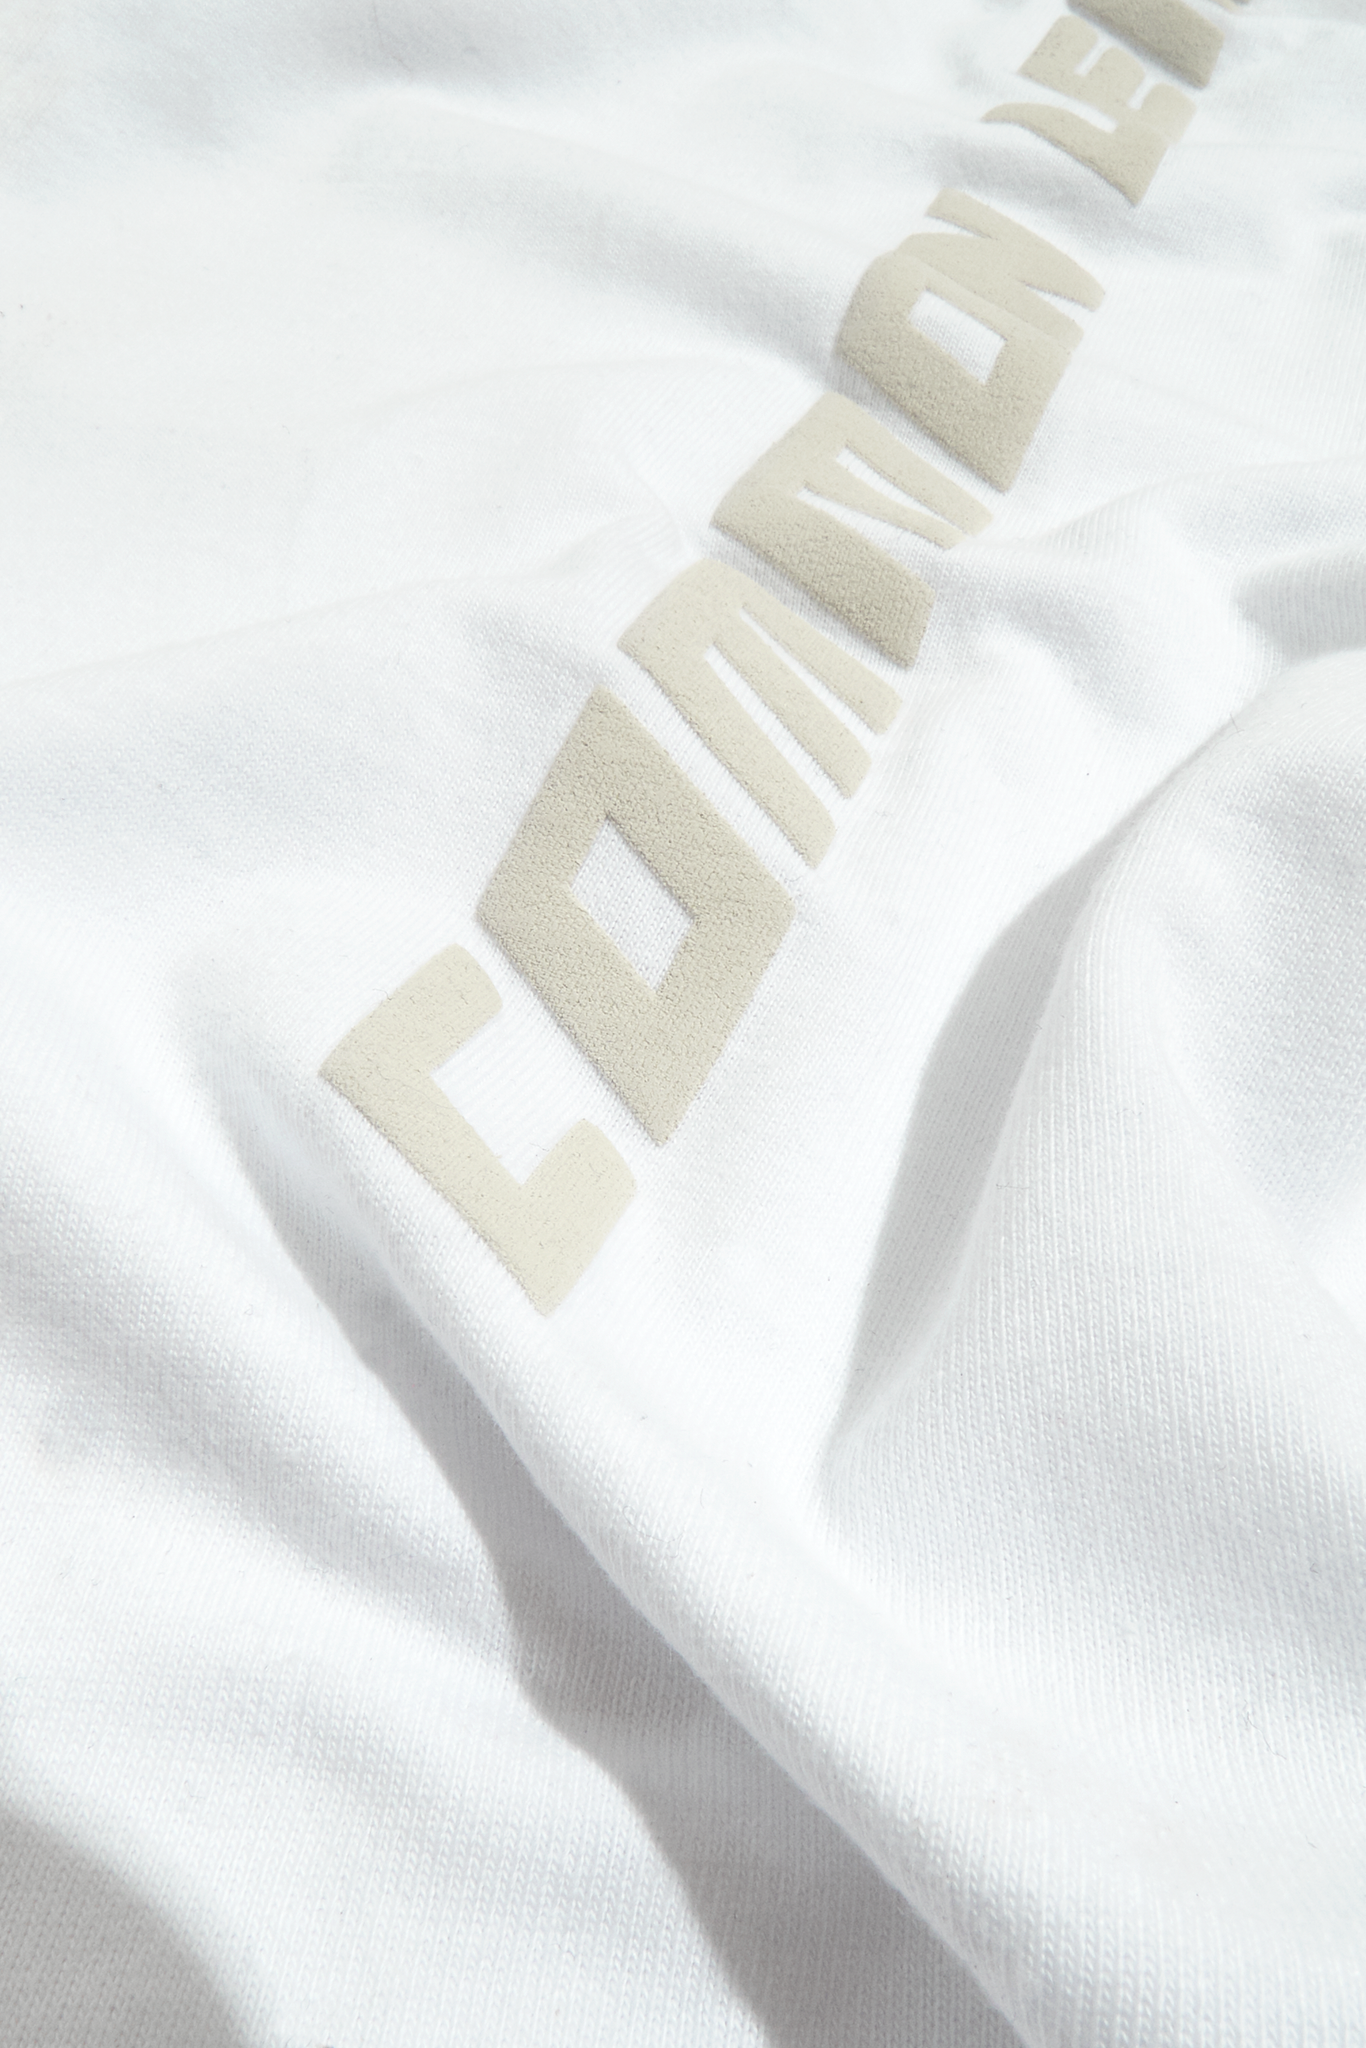 CL TYPOGRAPHY BRANDED LONG SLEEVE T-SHIRT